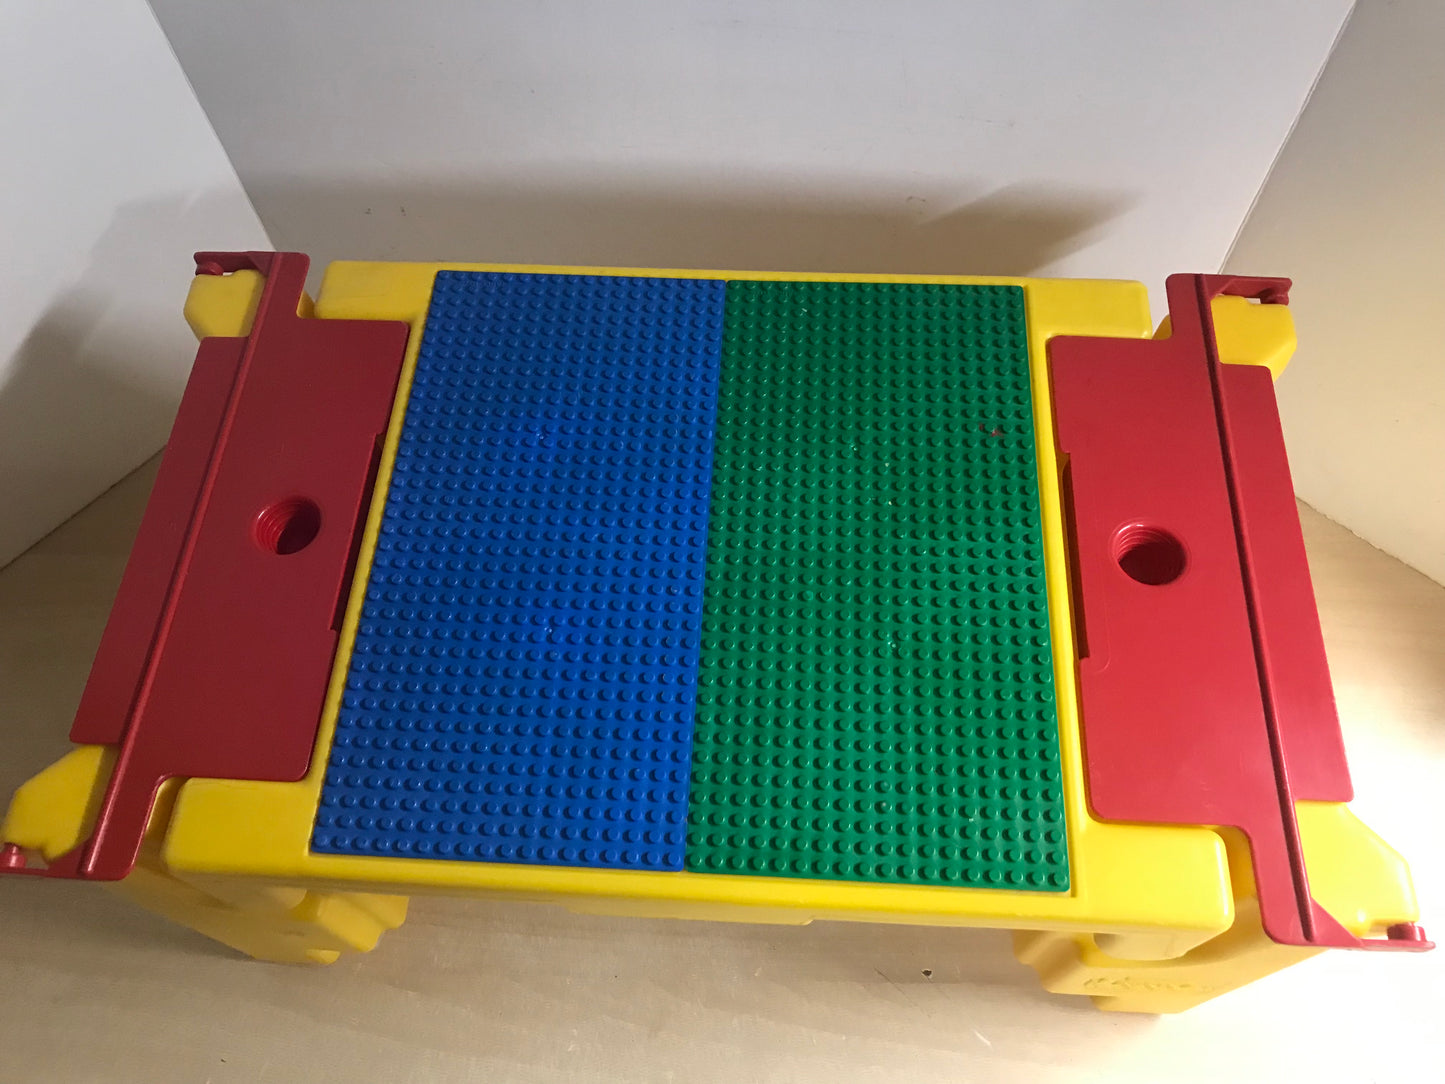 Lego Table By Lapper Folding Lap Table With Lego Storage Bins On Each Side Holds Regular Lego or Lego Duplo RARE